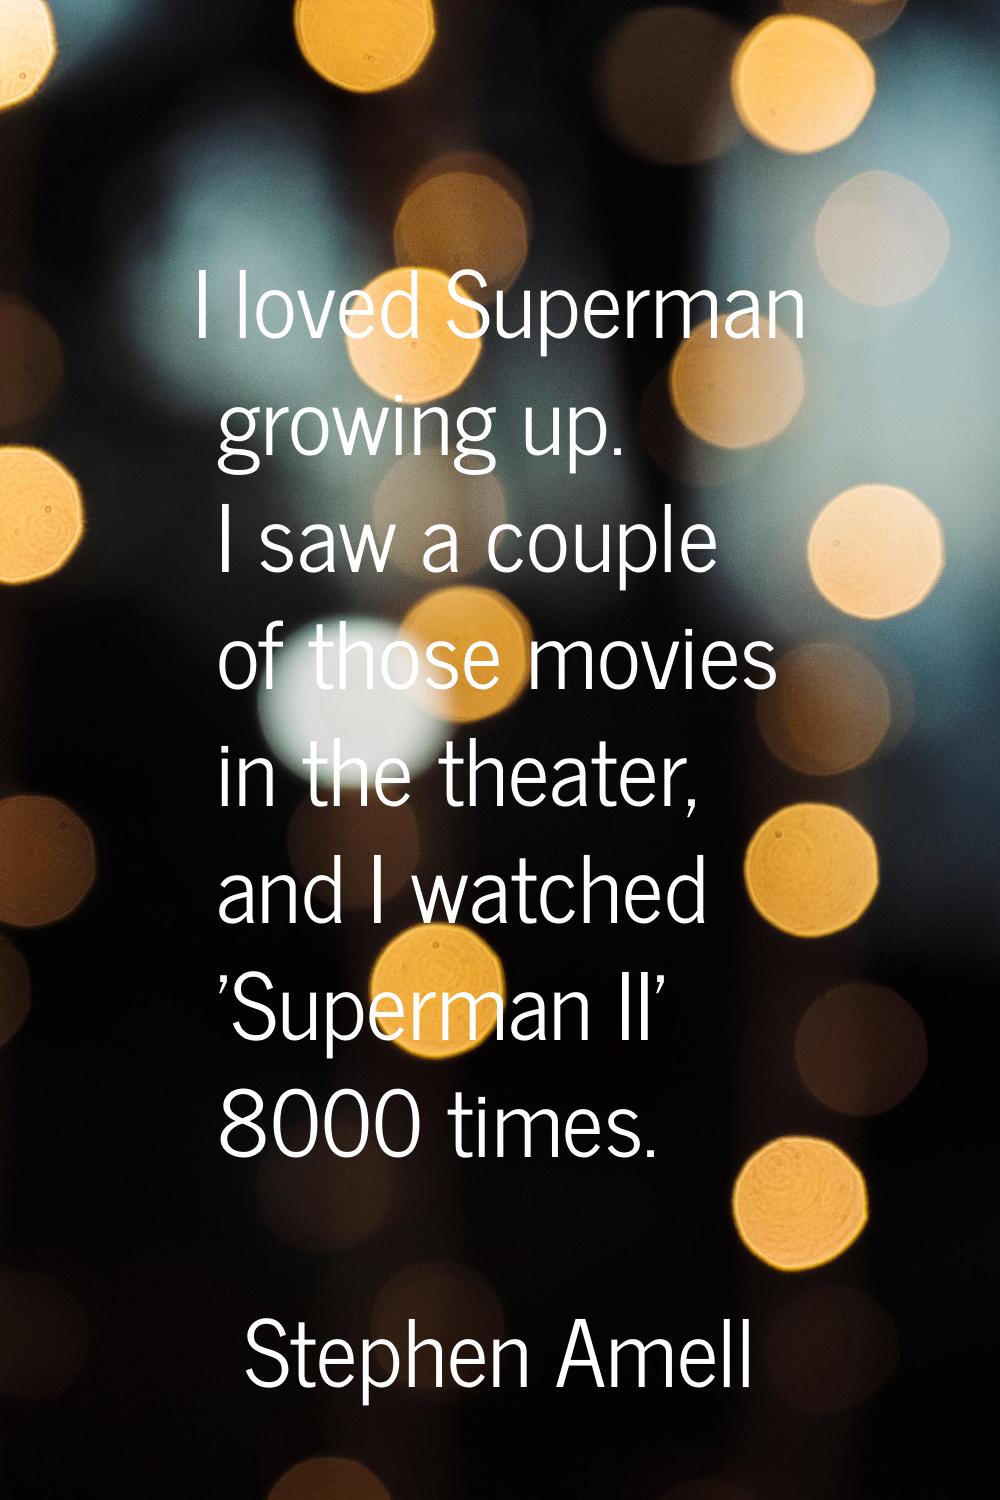 I loved Superman growing up. I saw a couple of those movies in the theater, and I watched 'Superman